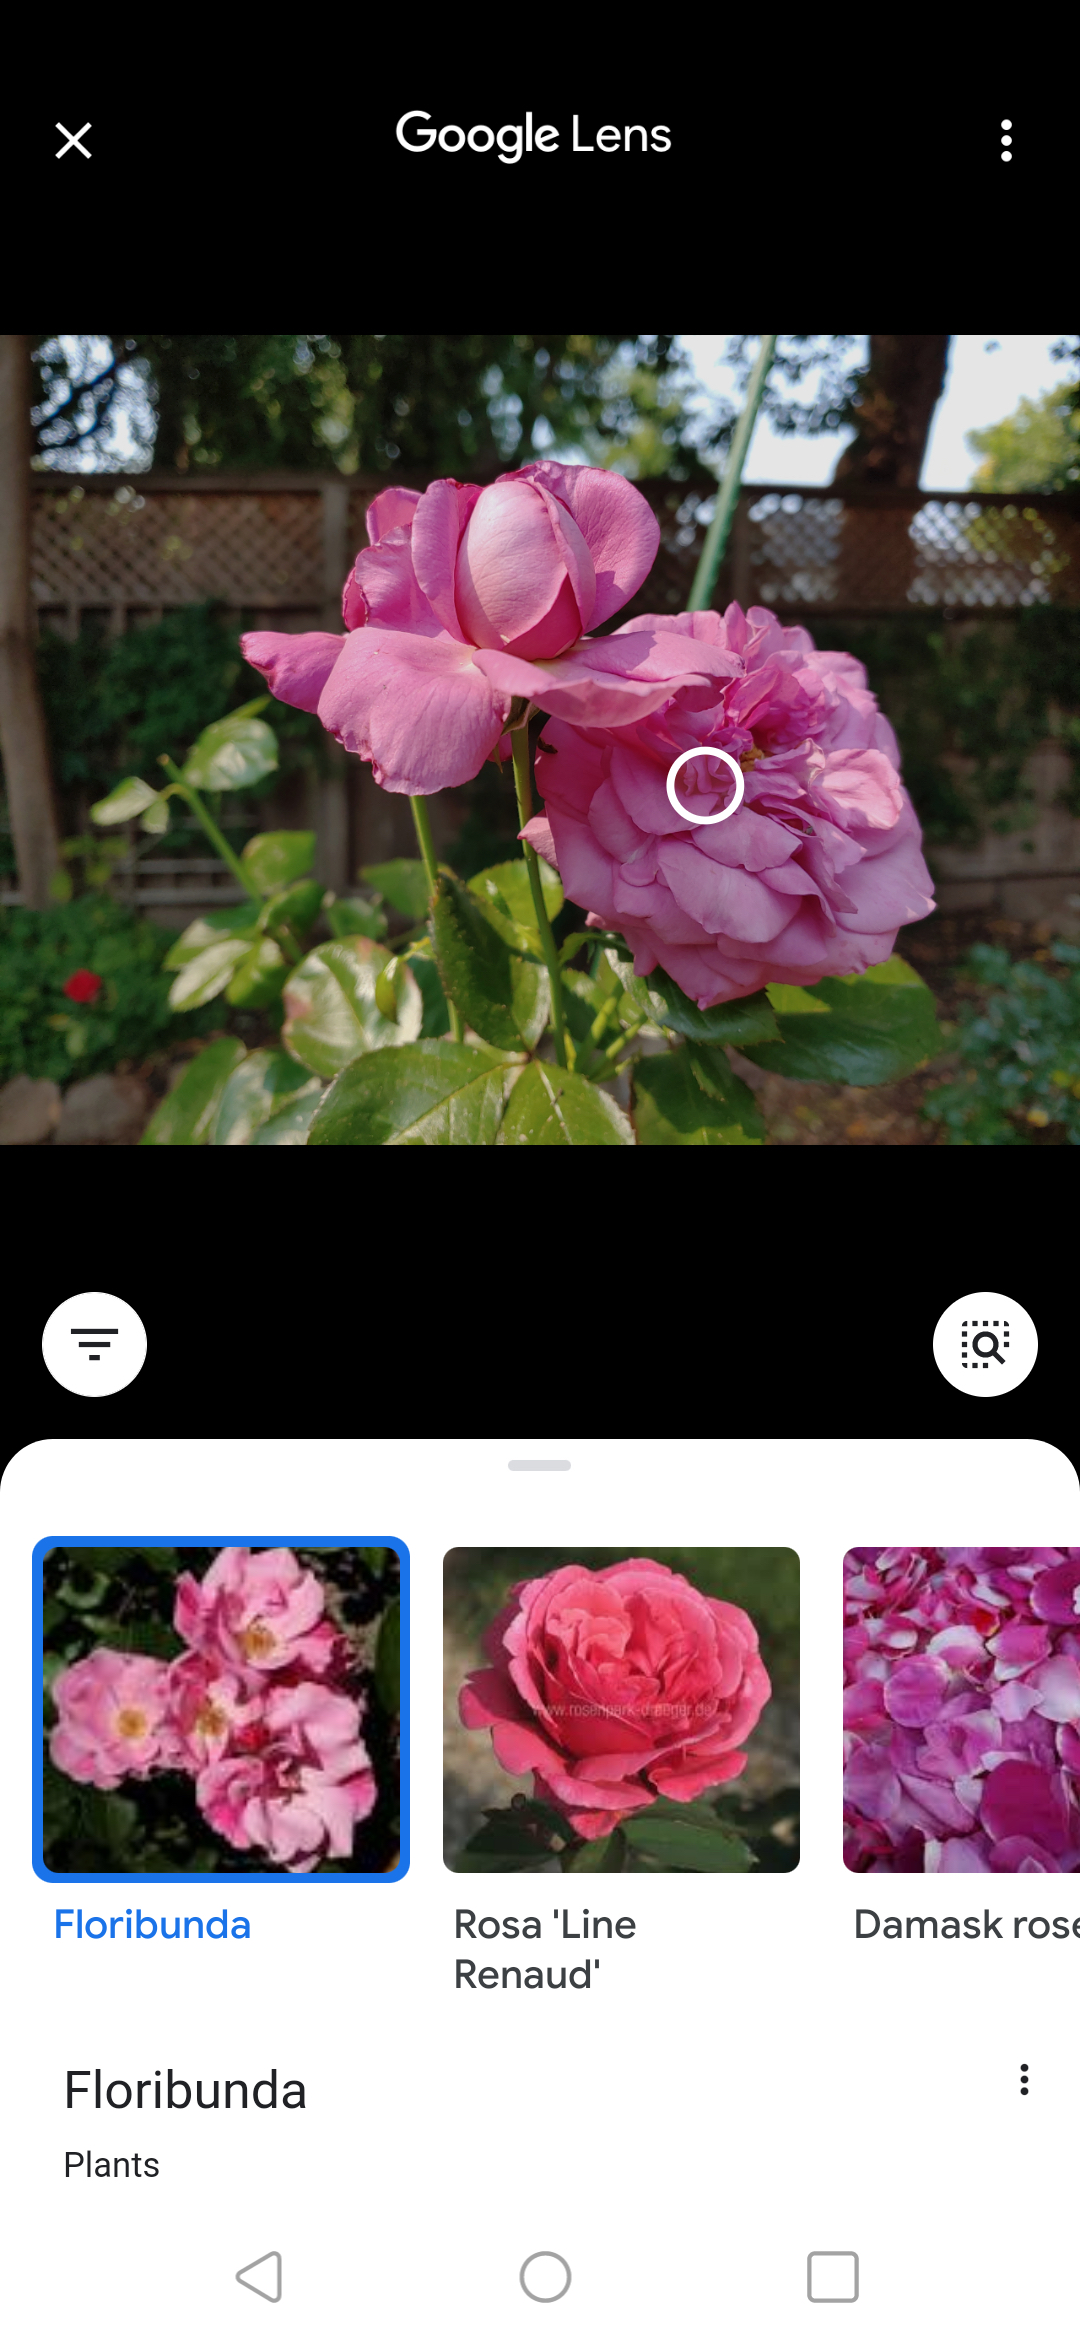 Step 3: Google Lens will perform a reverse image search, identify the image, and offer similar alternatives.